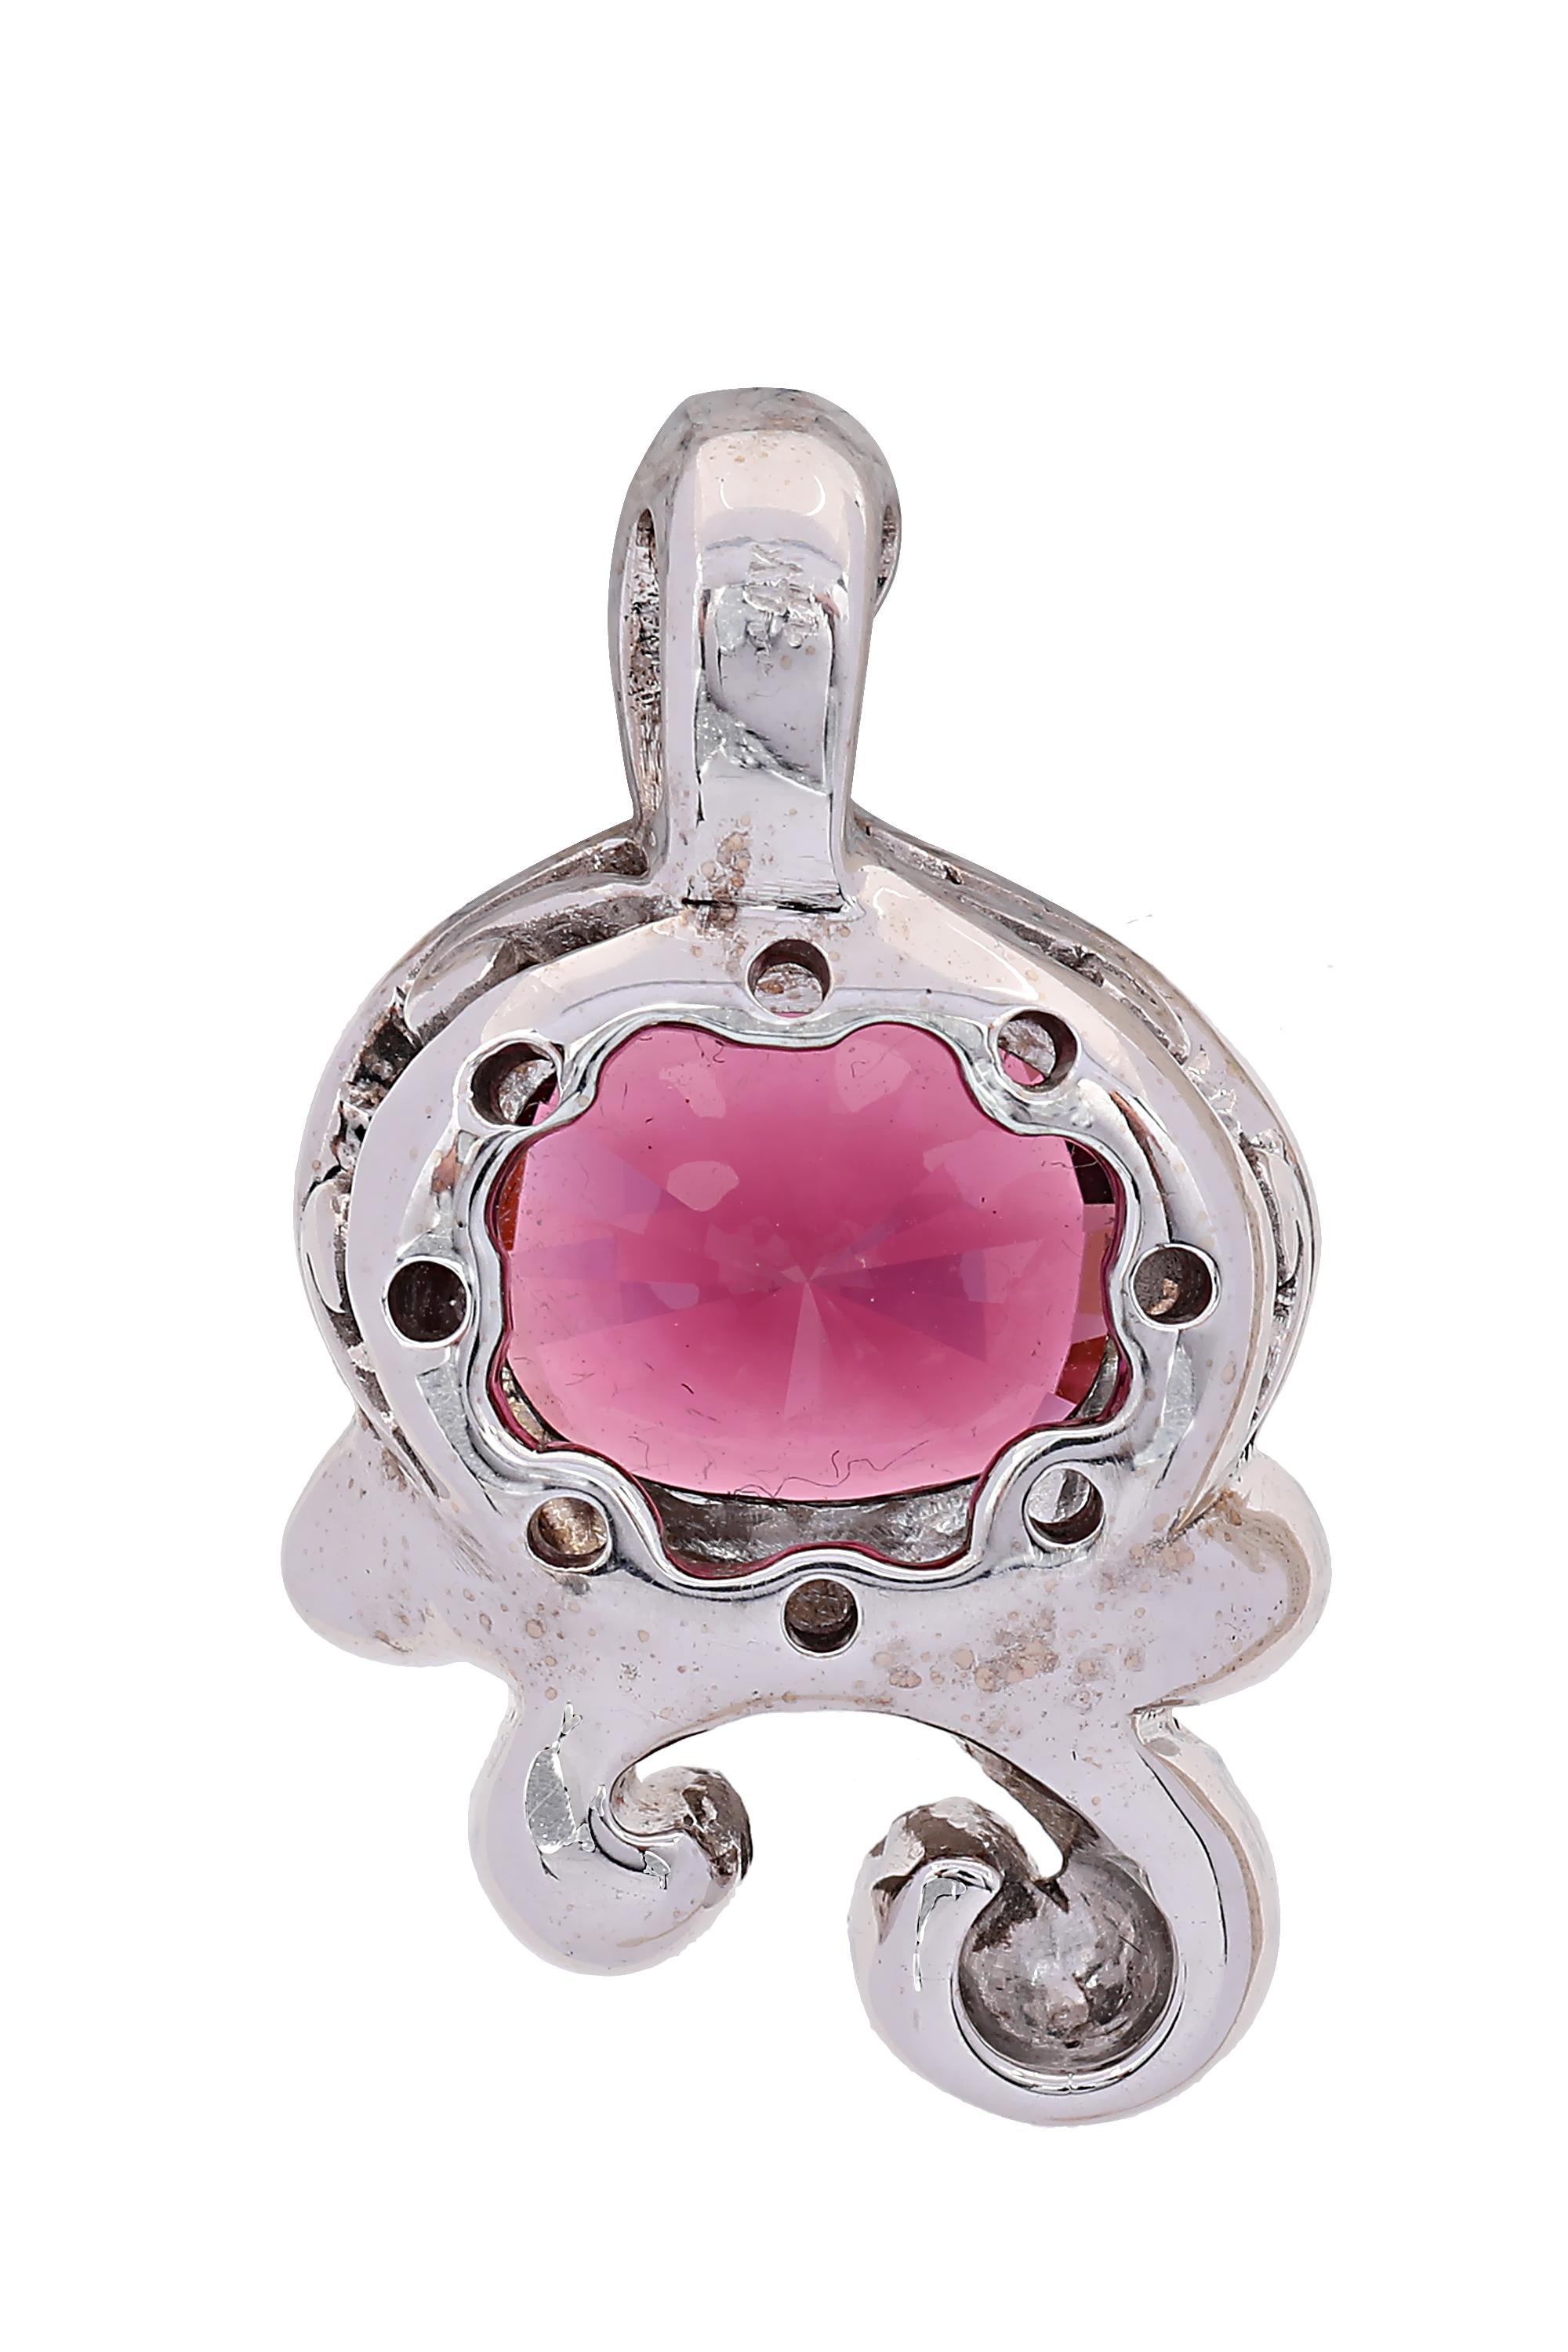 A richly saturated oval cut pink tourmaline of approximately 10 carats shines brightly from within a swirl of gleaming 14 karat white gold in this modern and very wearable pendant. Measuring 1.25